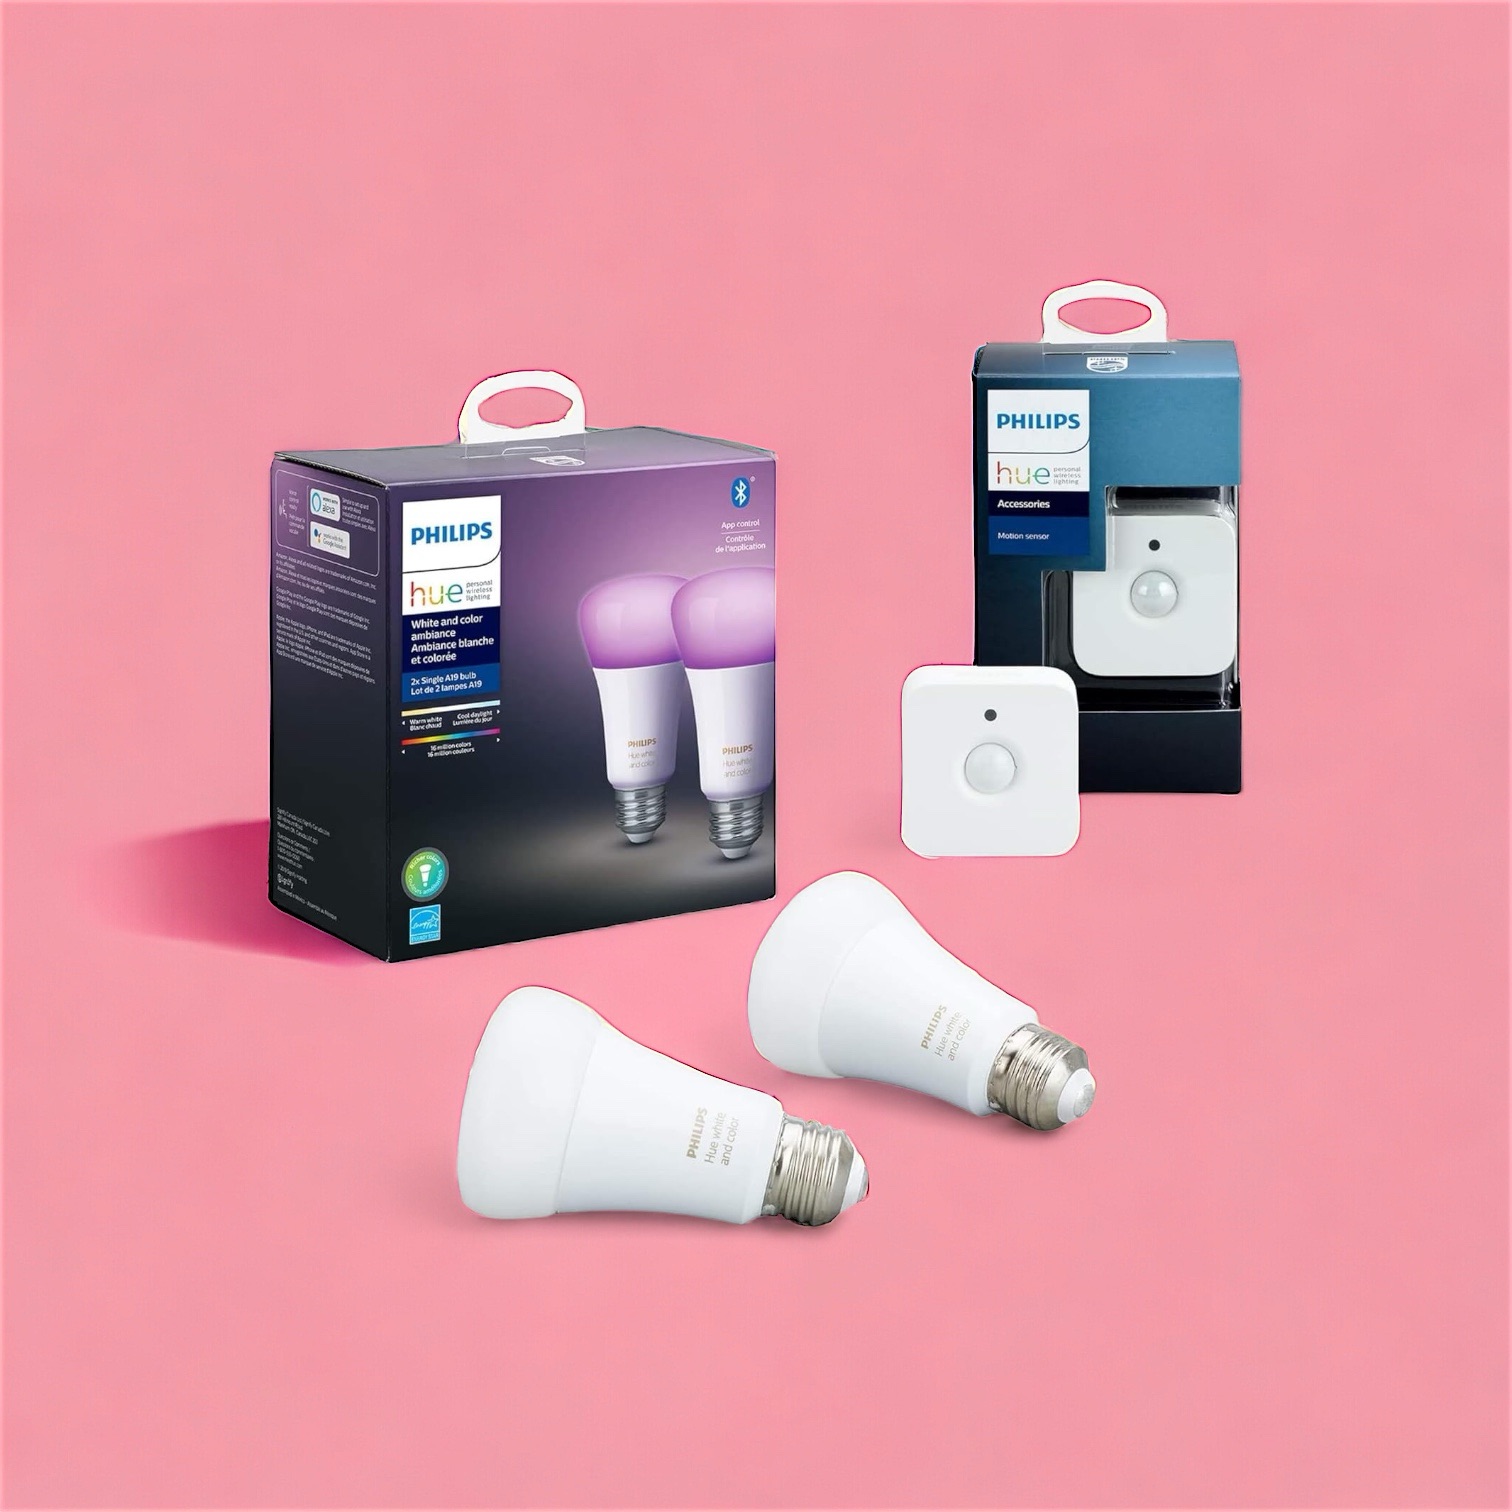 Elevate Your Home Lighting Game with the Philips Hue Motion Sensor & LED Smart Bulbs